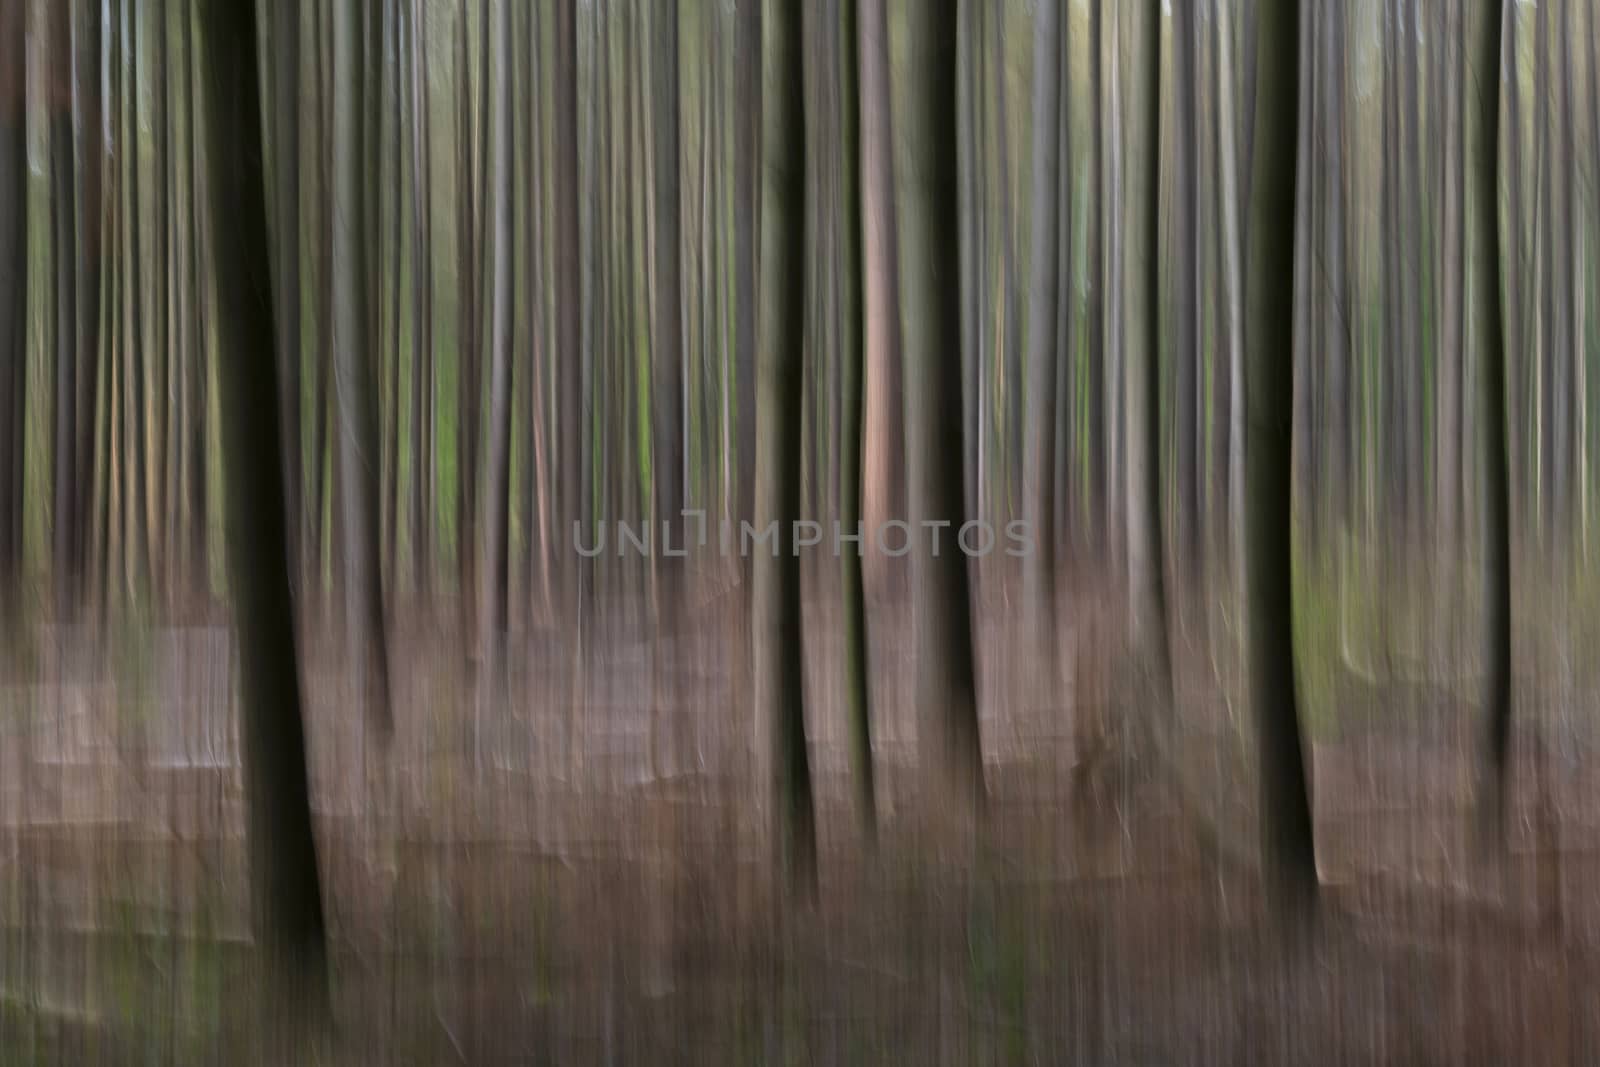 Abstract trees in a forest
 by Tofotografie